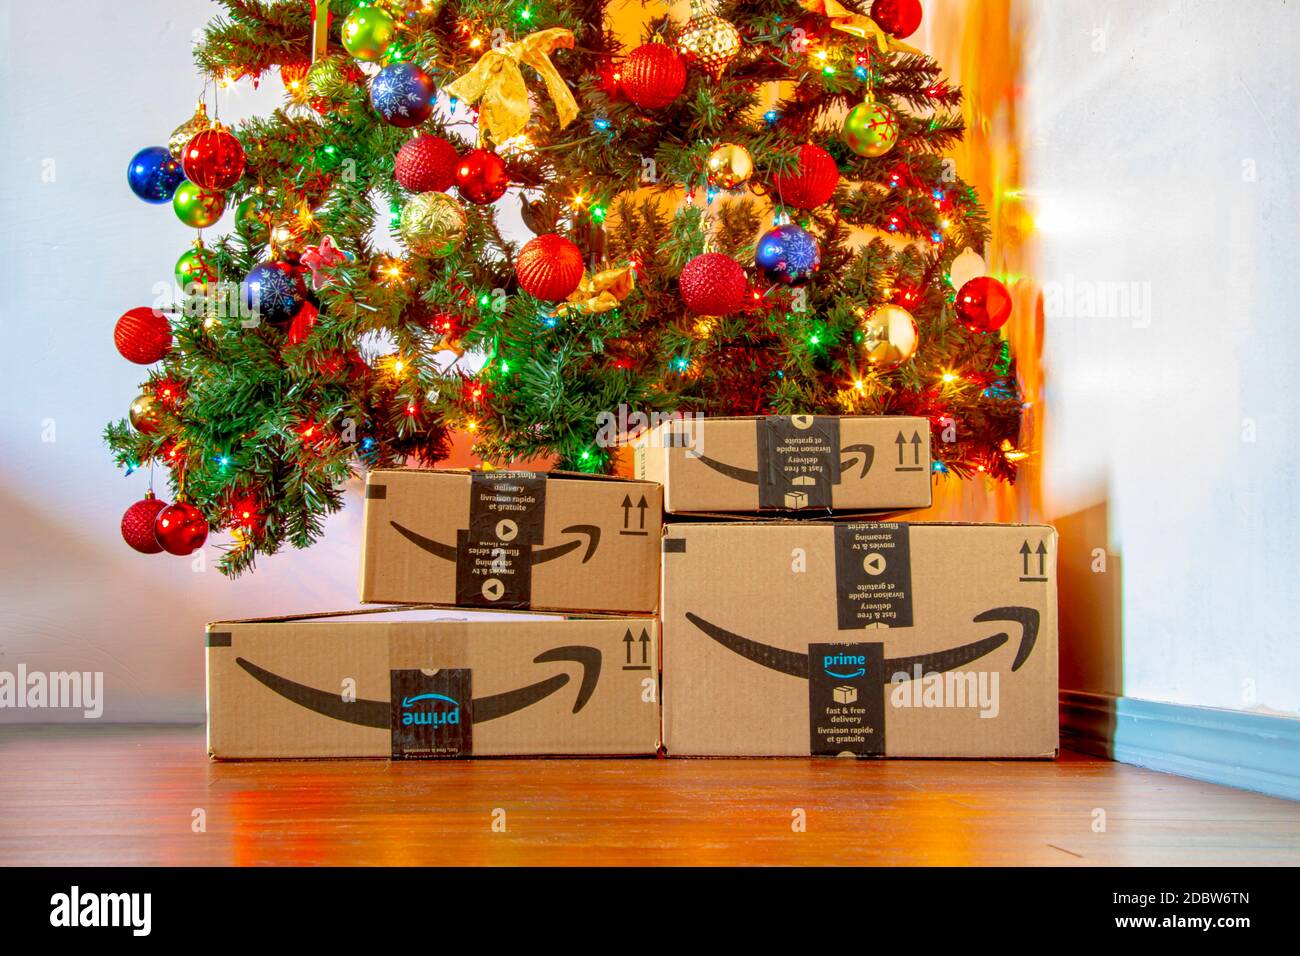 Calgary, Alberta, Canada. Nov. 16, 2020. Amazon boxes under a Christmas tree with ornaments and lights on. Concept: Shopping during the holidays. Stock Photo